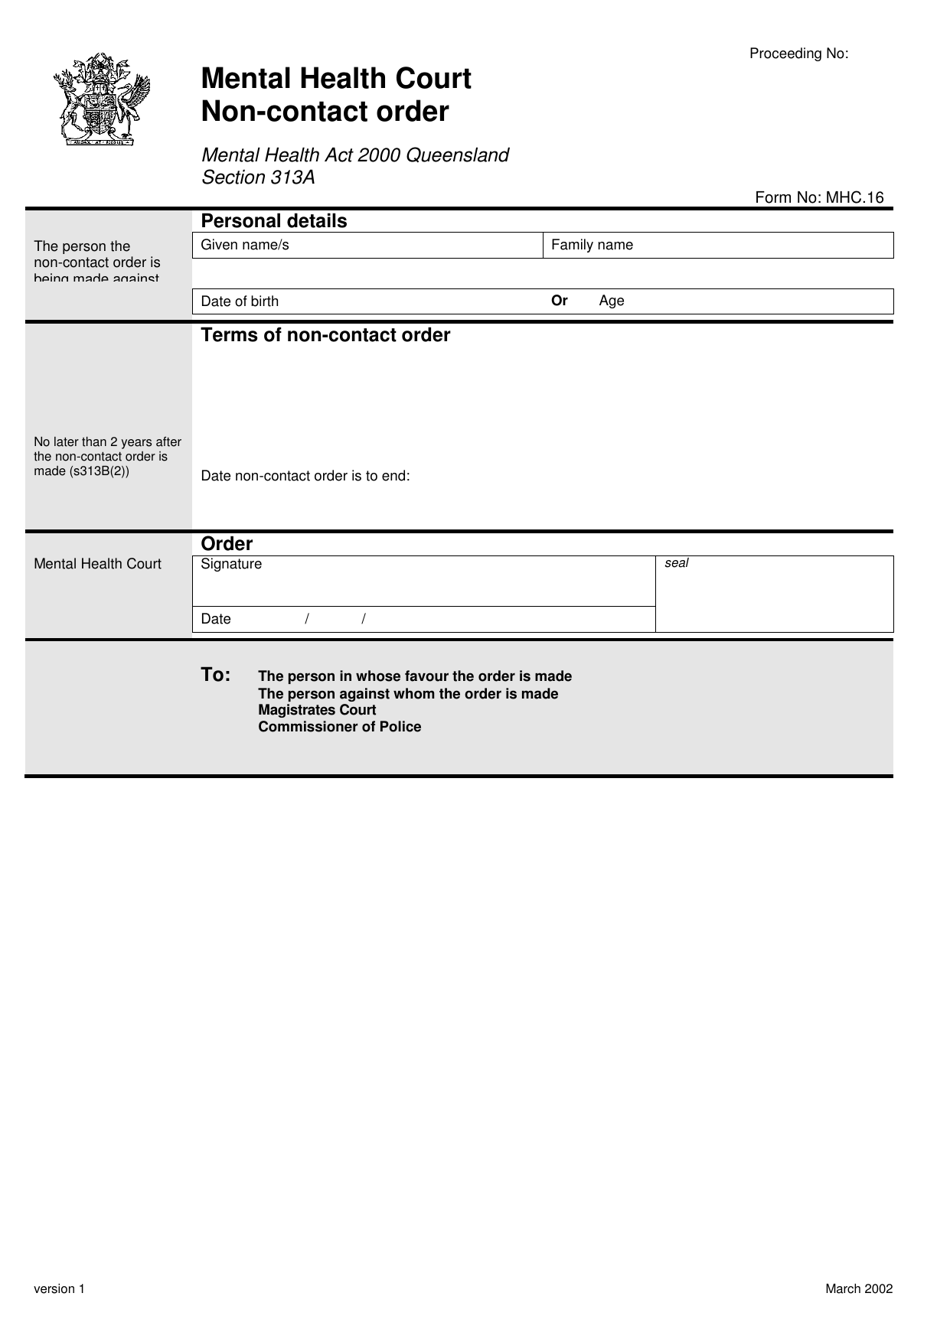 Form MHC.16 Non-contact Order - Queensland, Australia, Page 1